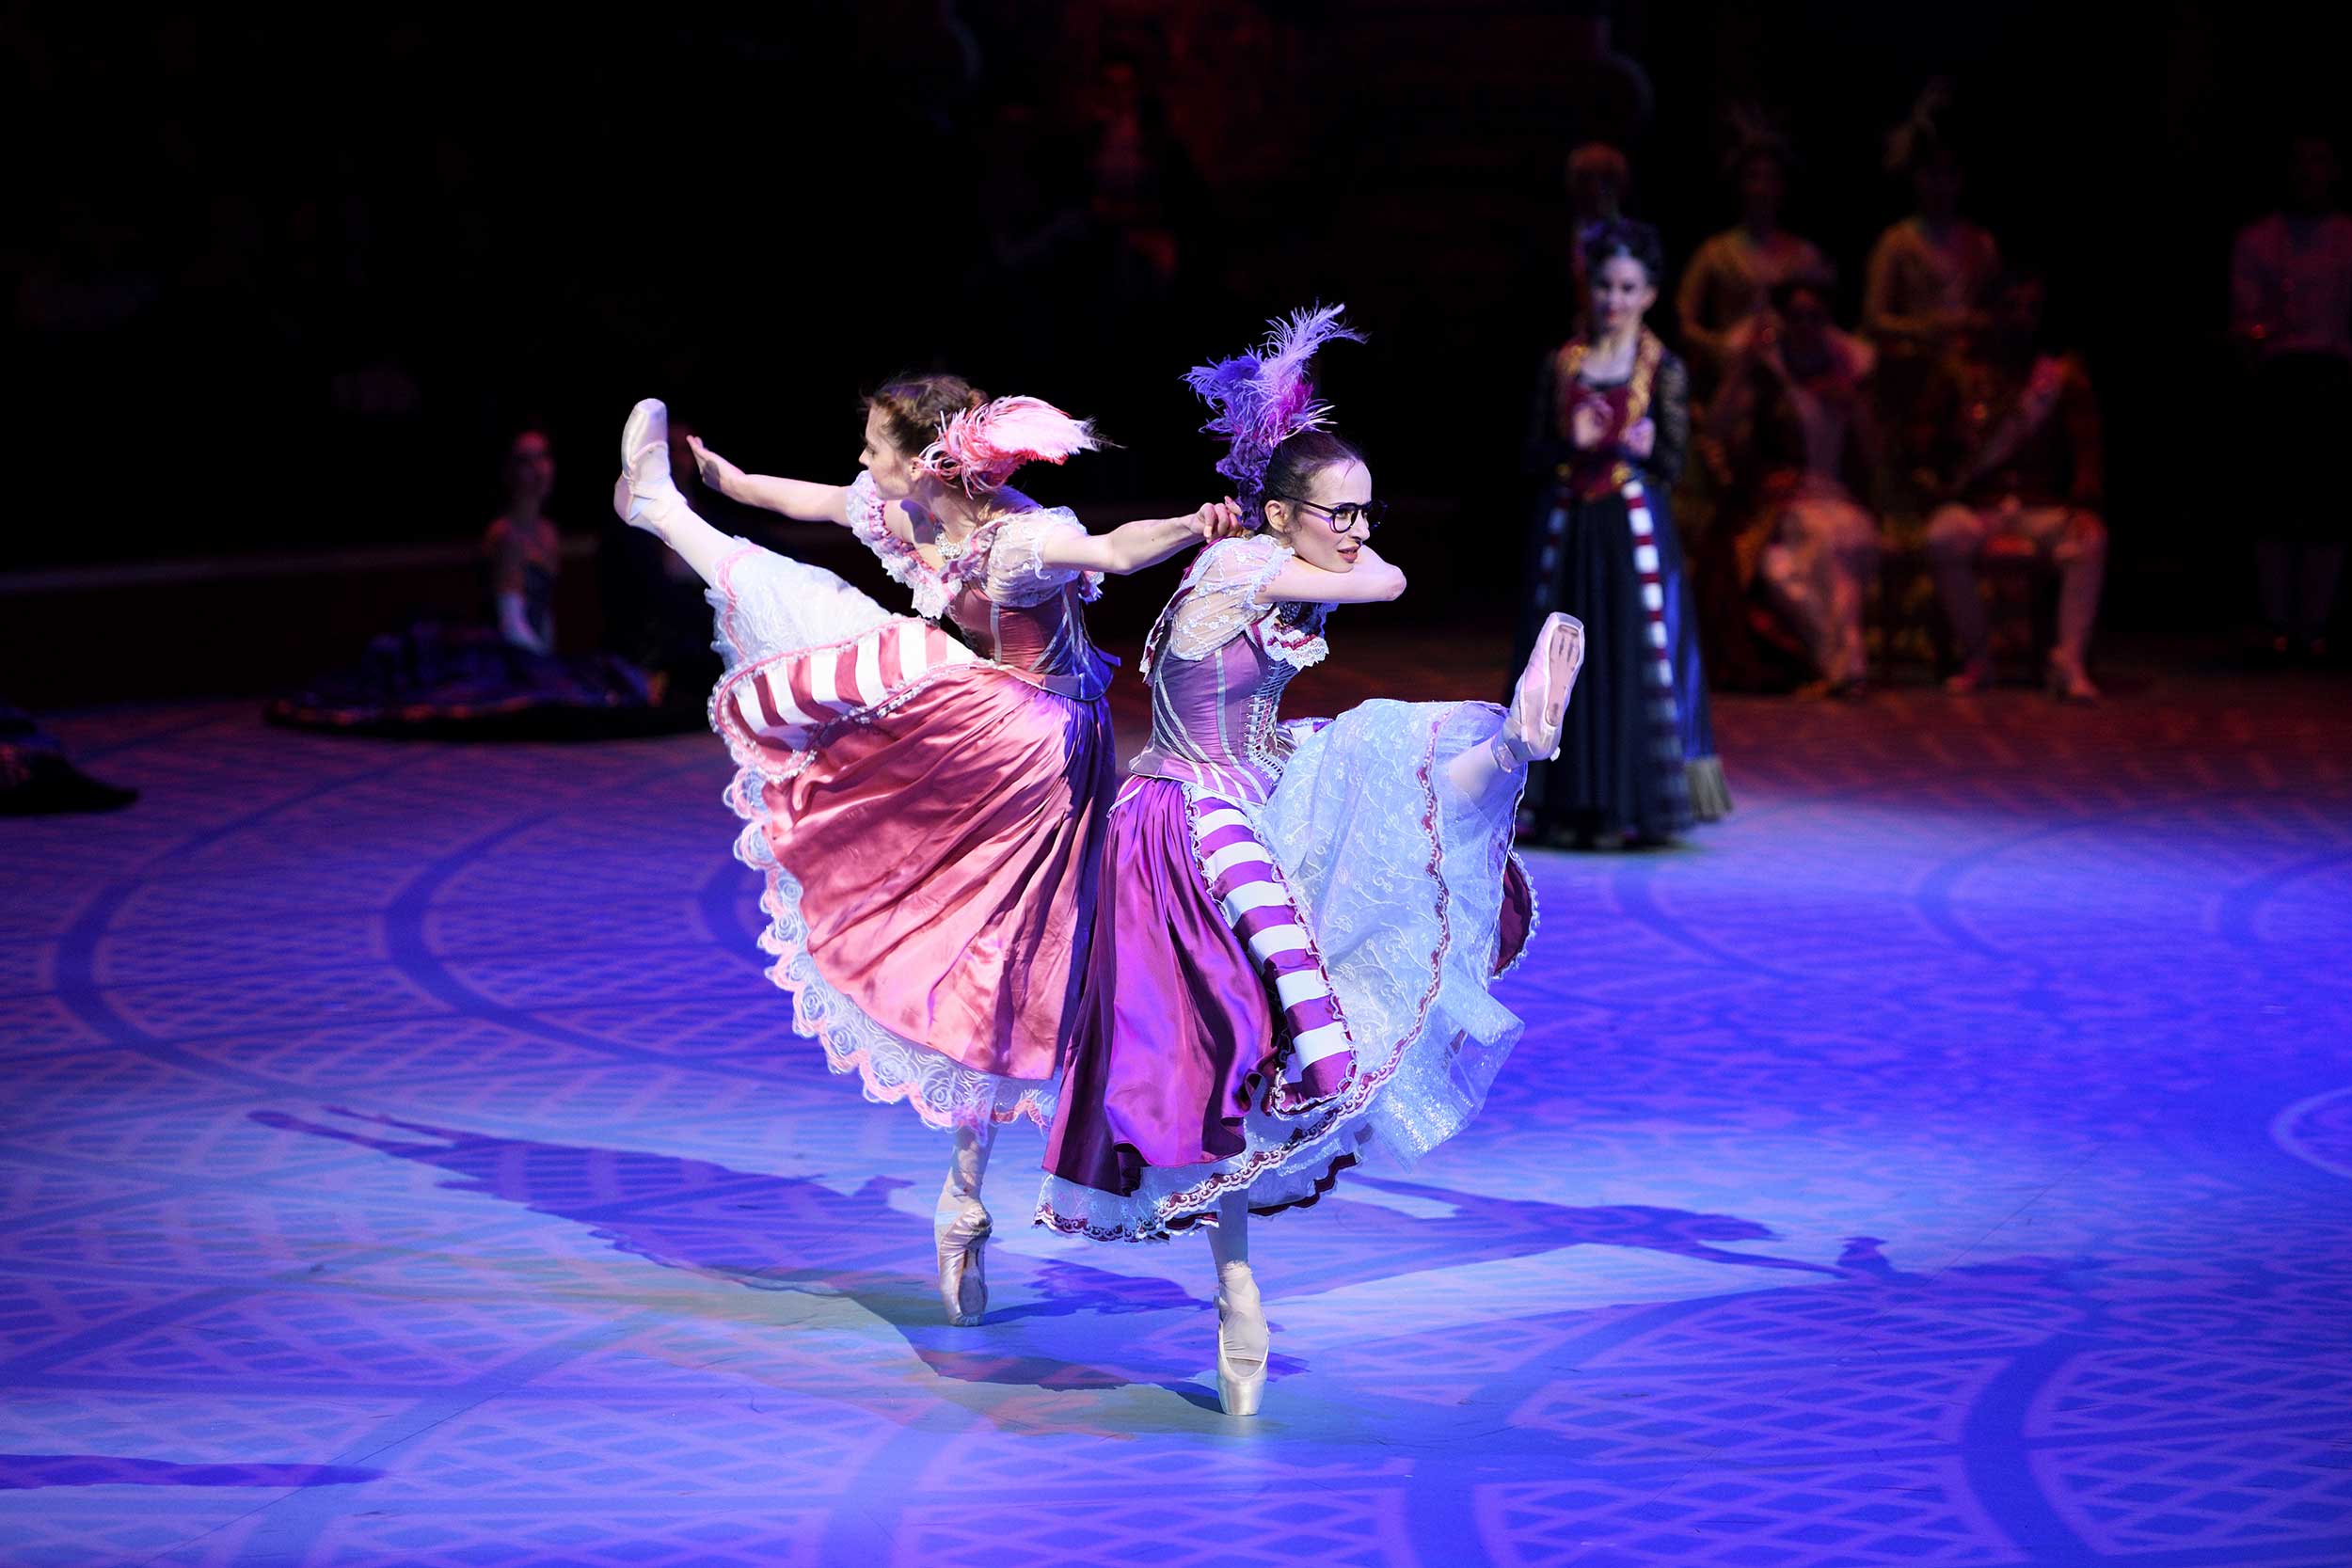 Cinderella in-the-round: Stepsisters (extract) | English National Ballet